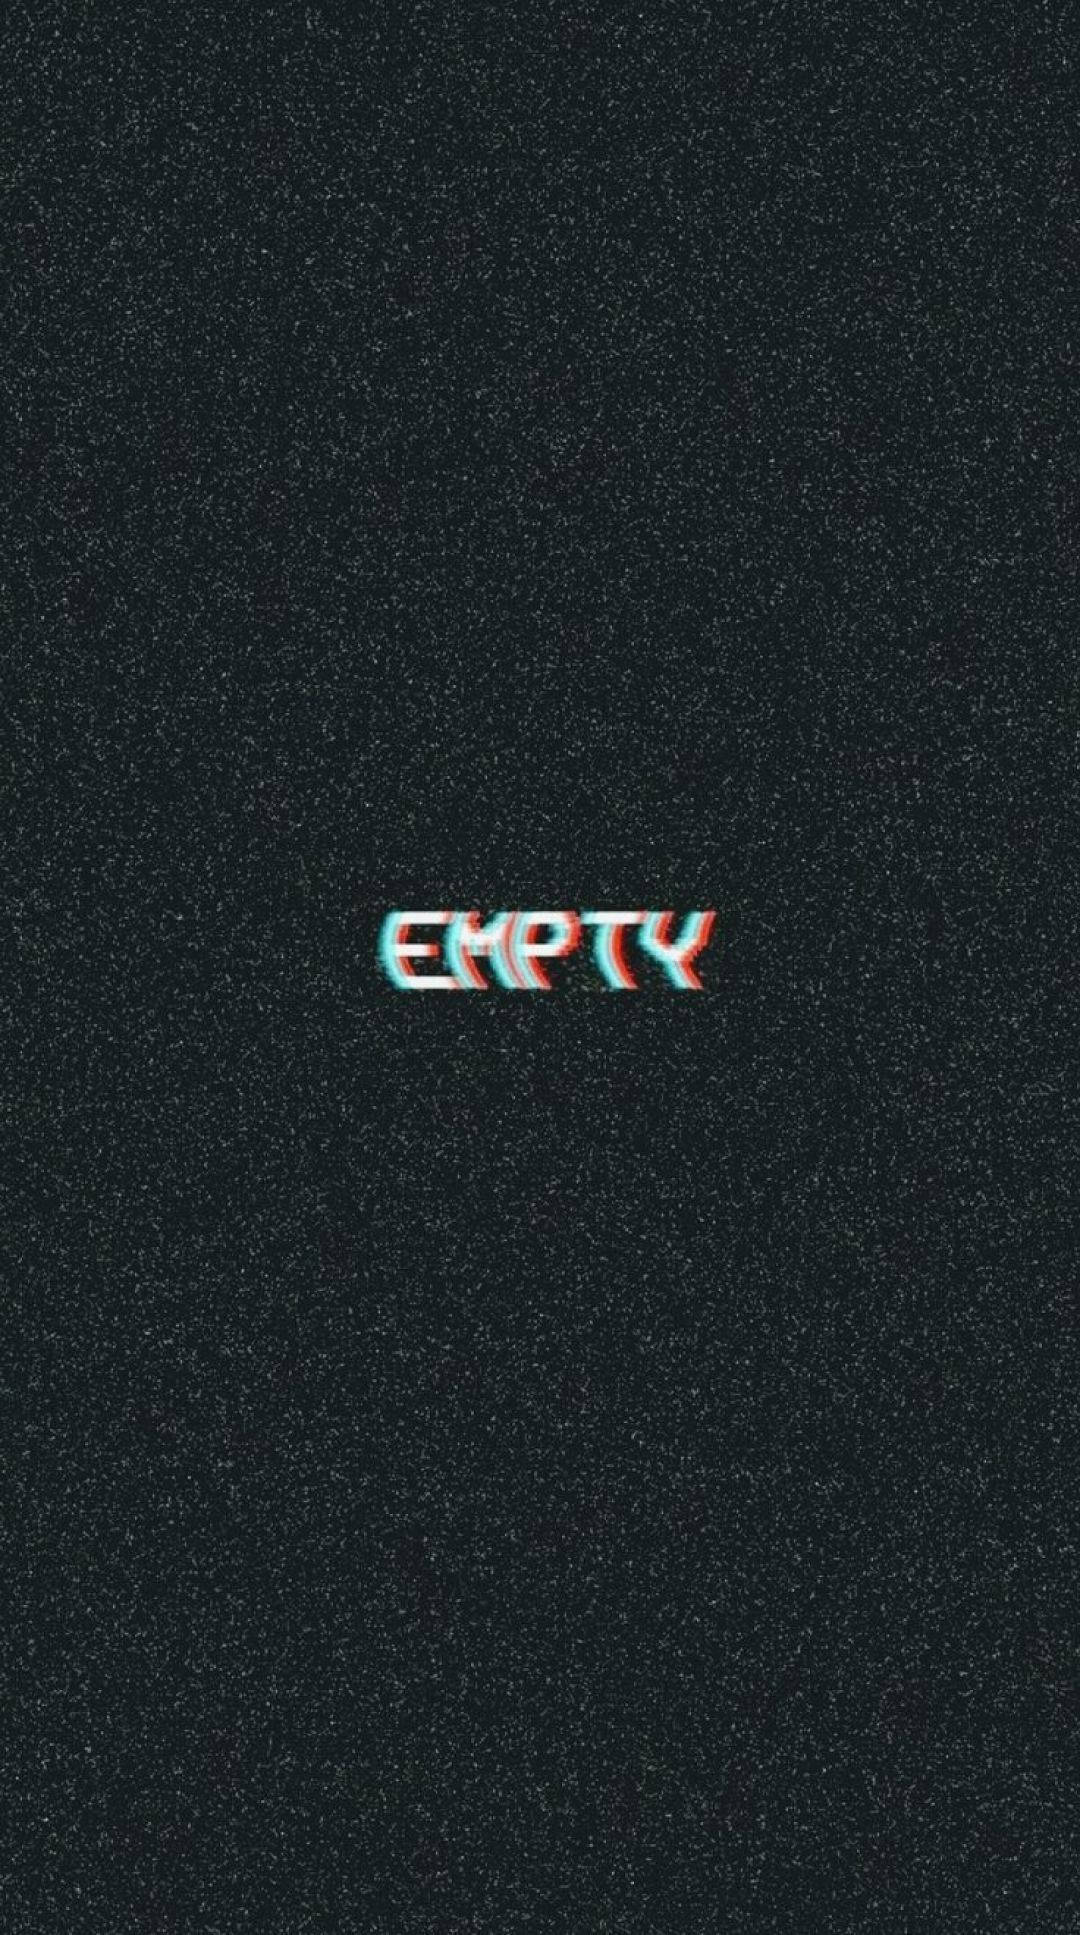 Glitch wallpaper with the word 